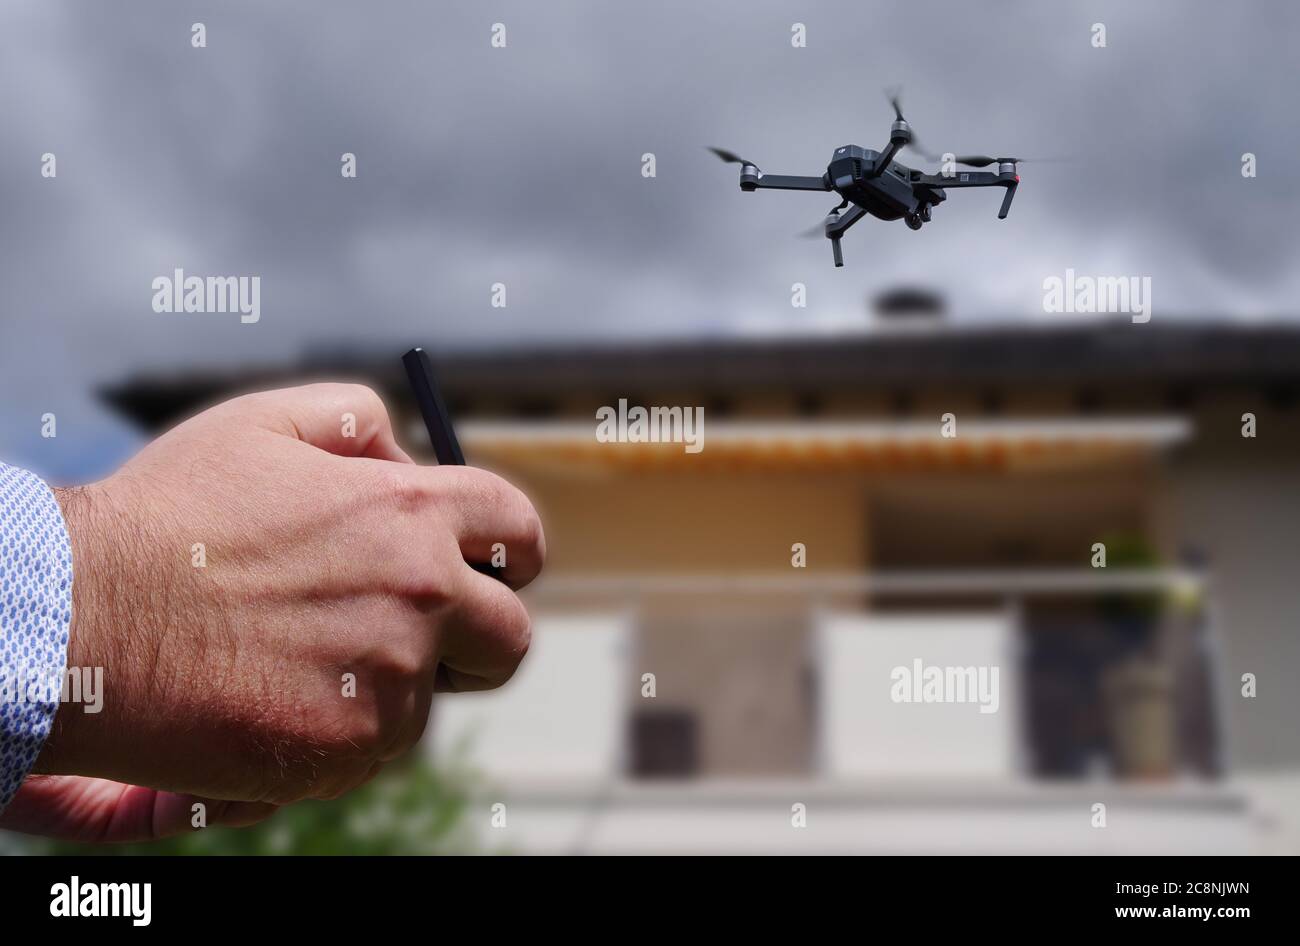 Drone in the air inspecting the roof over the house. Close-up of drone and roof. Stock Photo